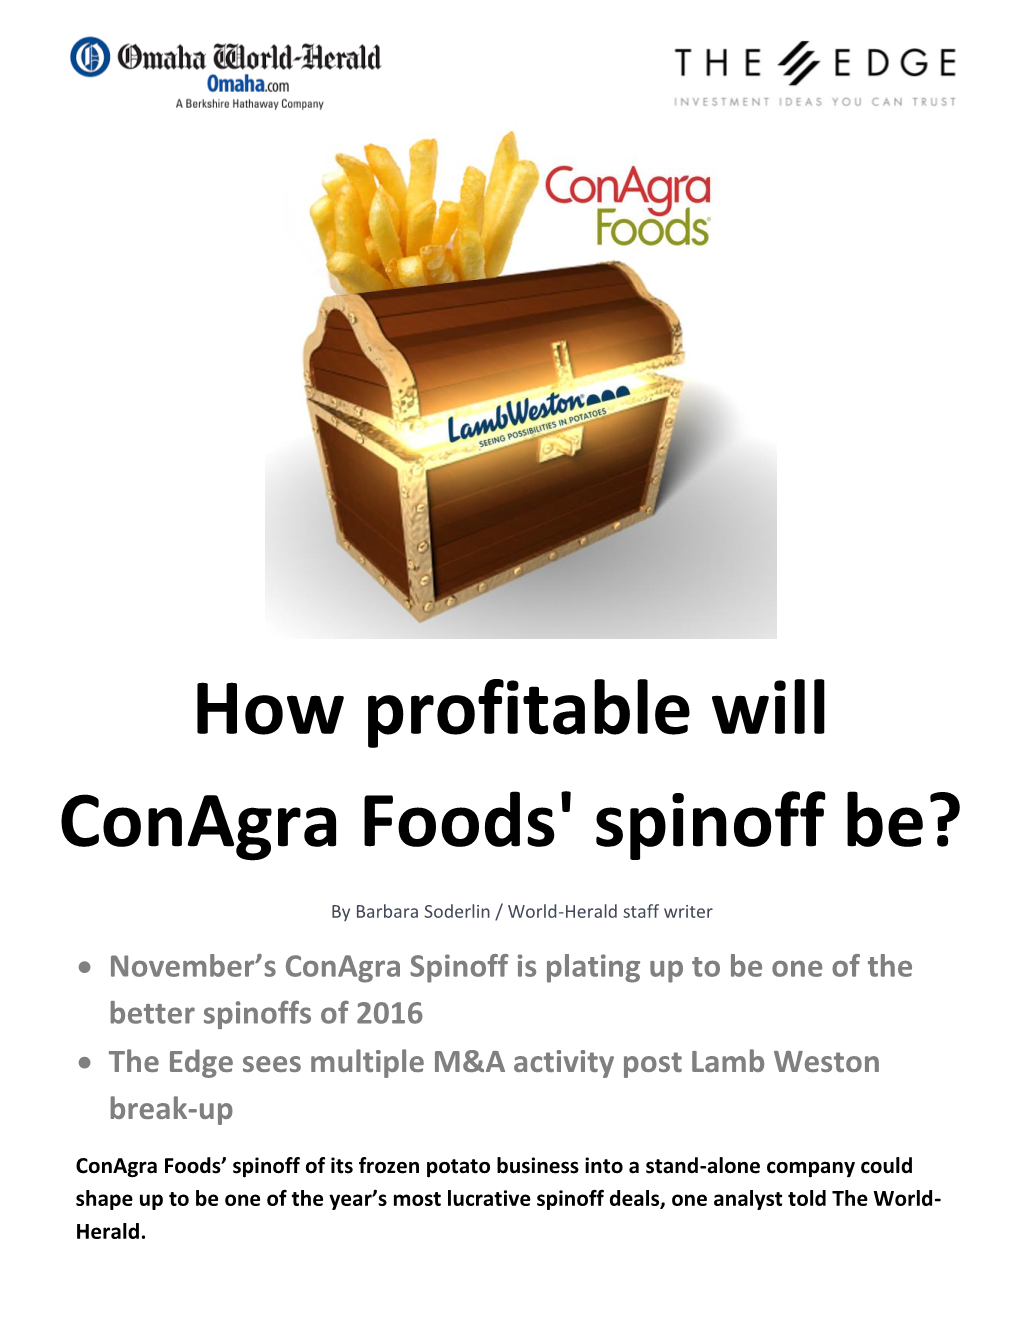 How Profitable Will Conagra Foods' Spinoff Be?